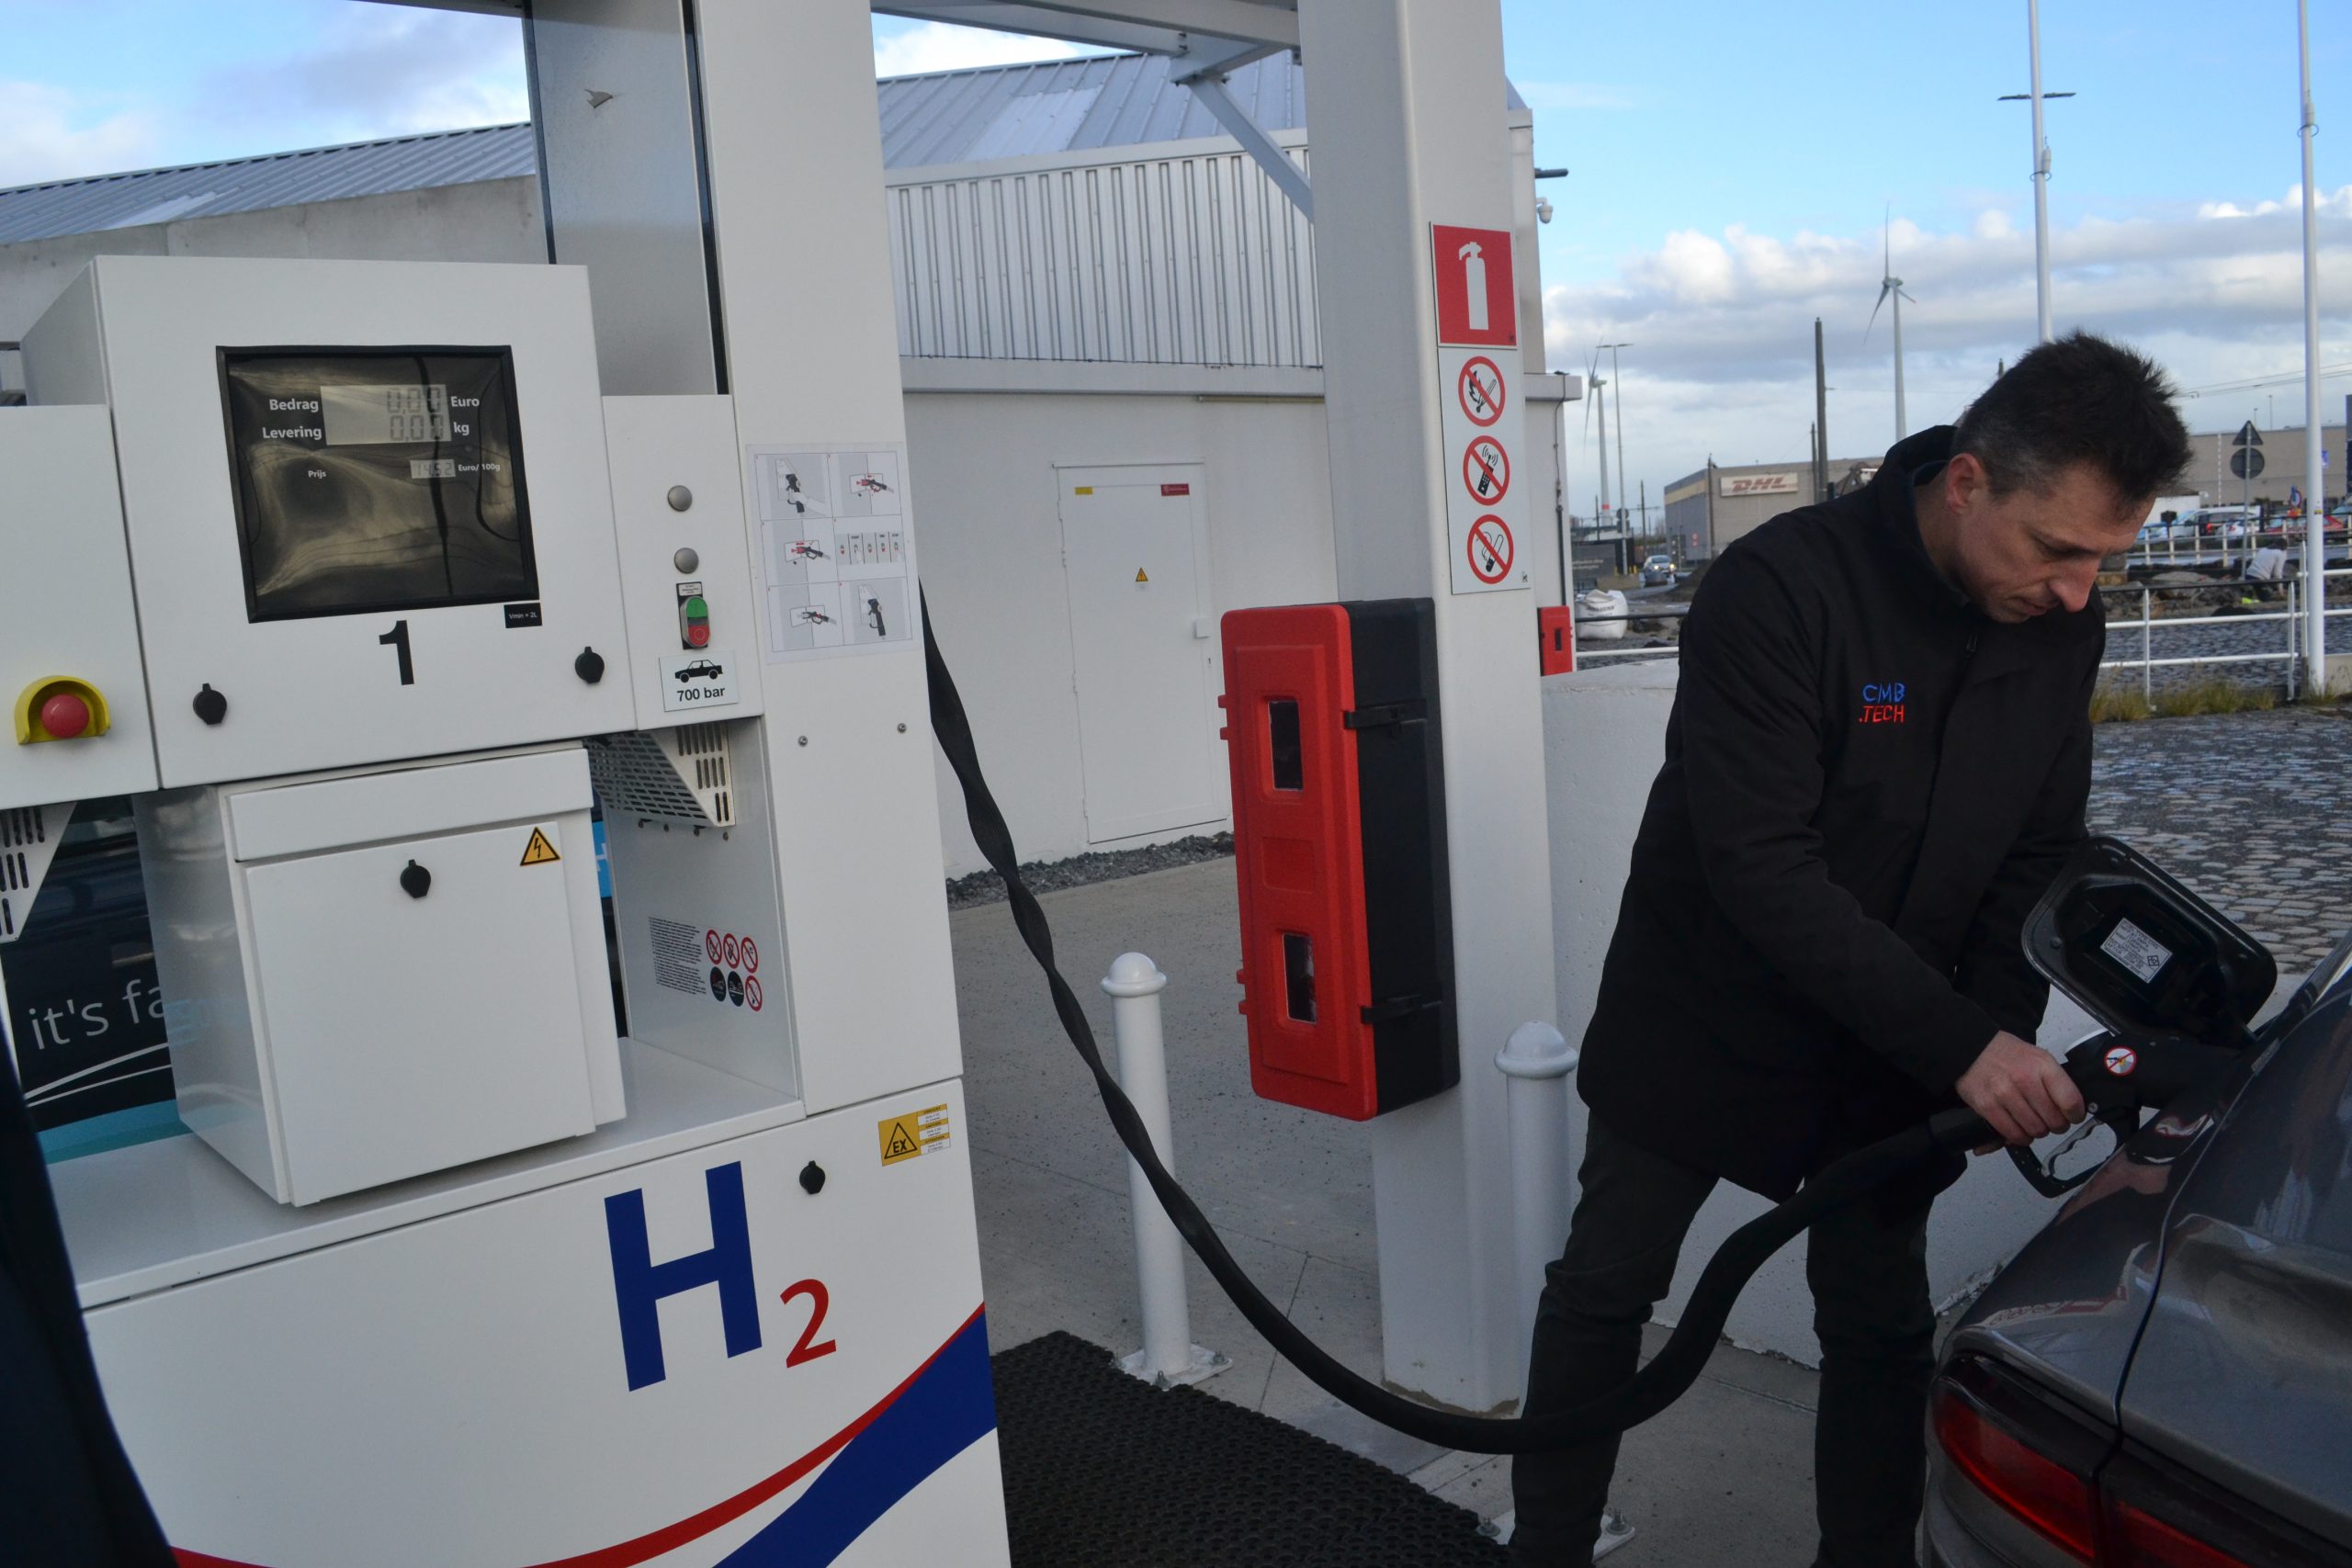 Roy Campe tanks up on hydrogen at the port of Antwerp